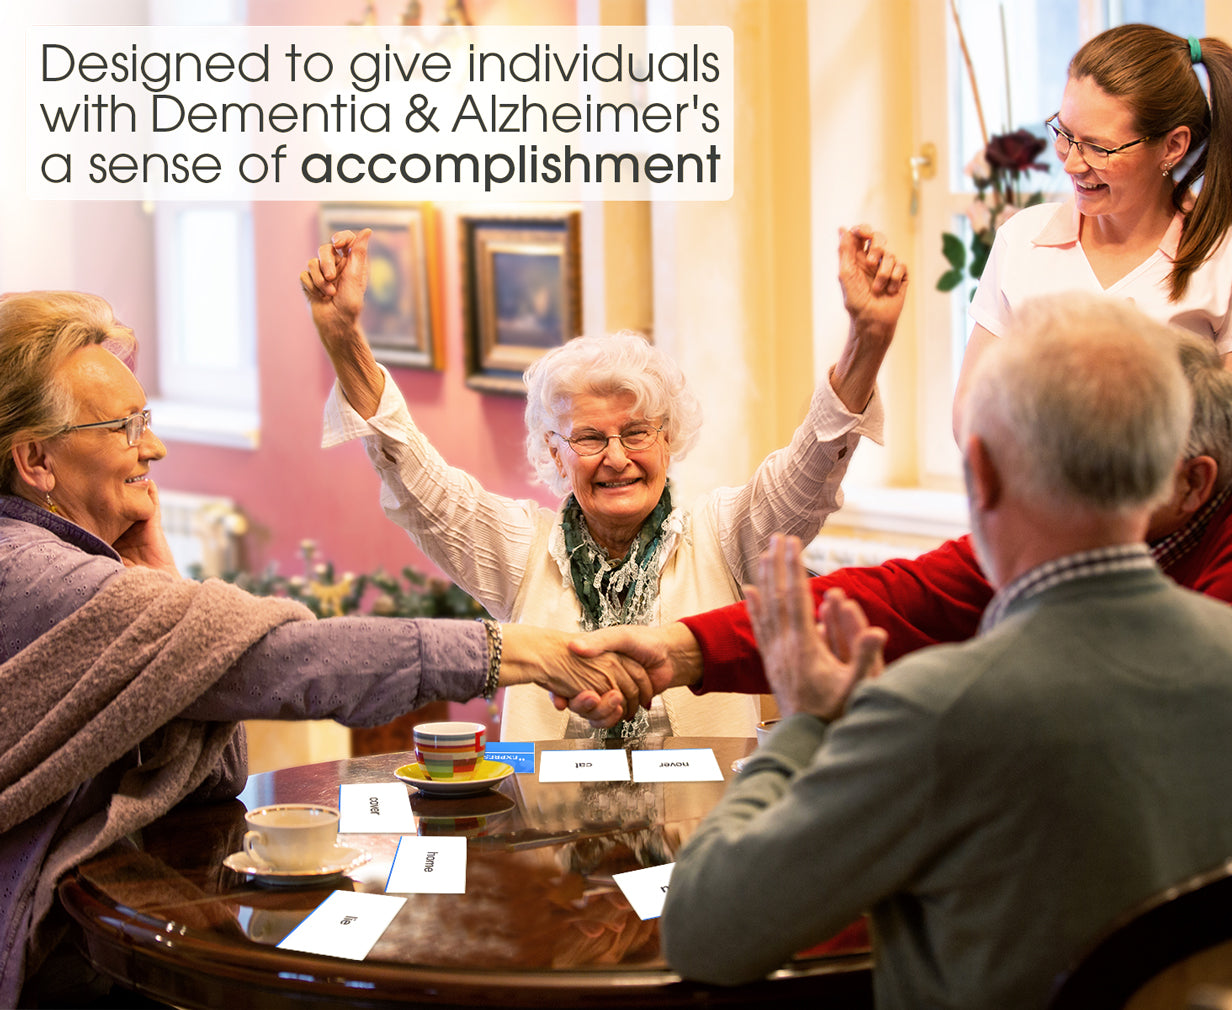 gives people with dementia and Alzheimer's a sense of accomplishment